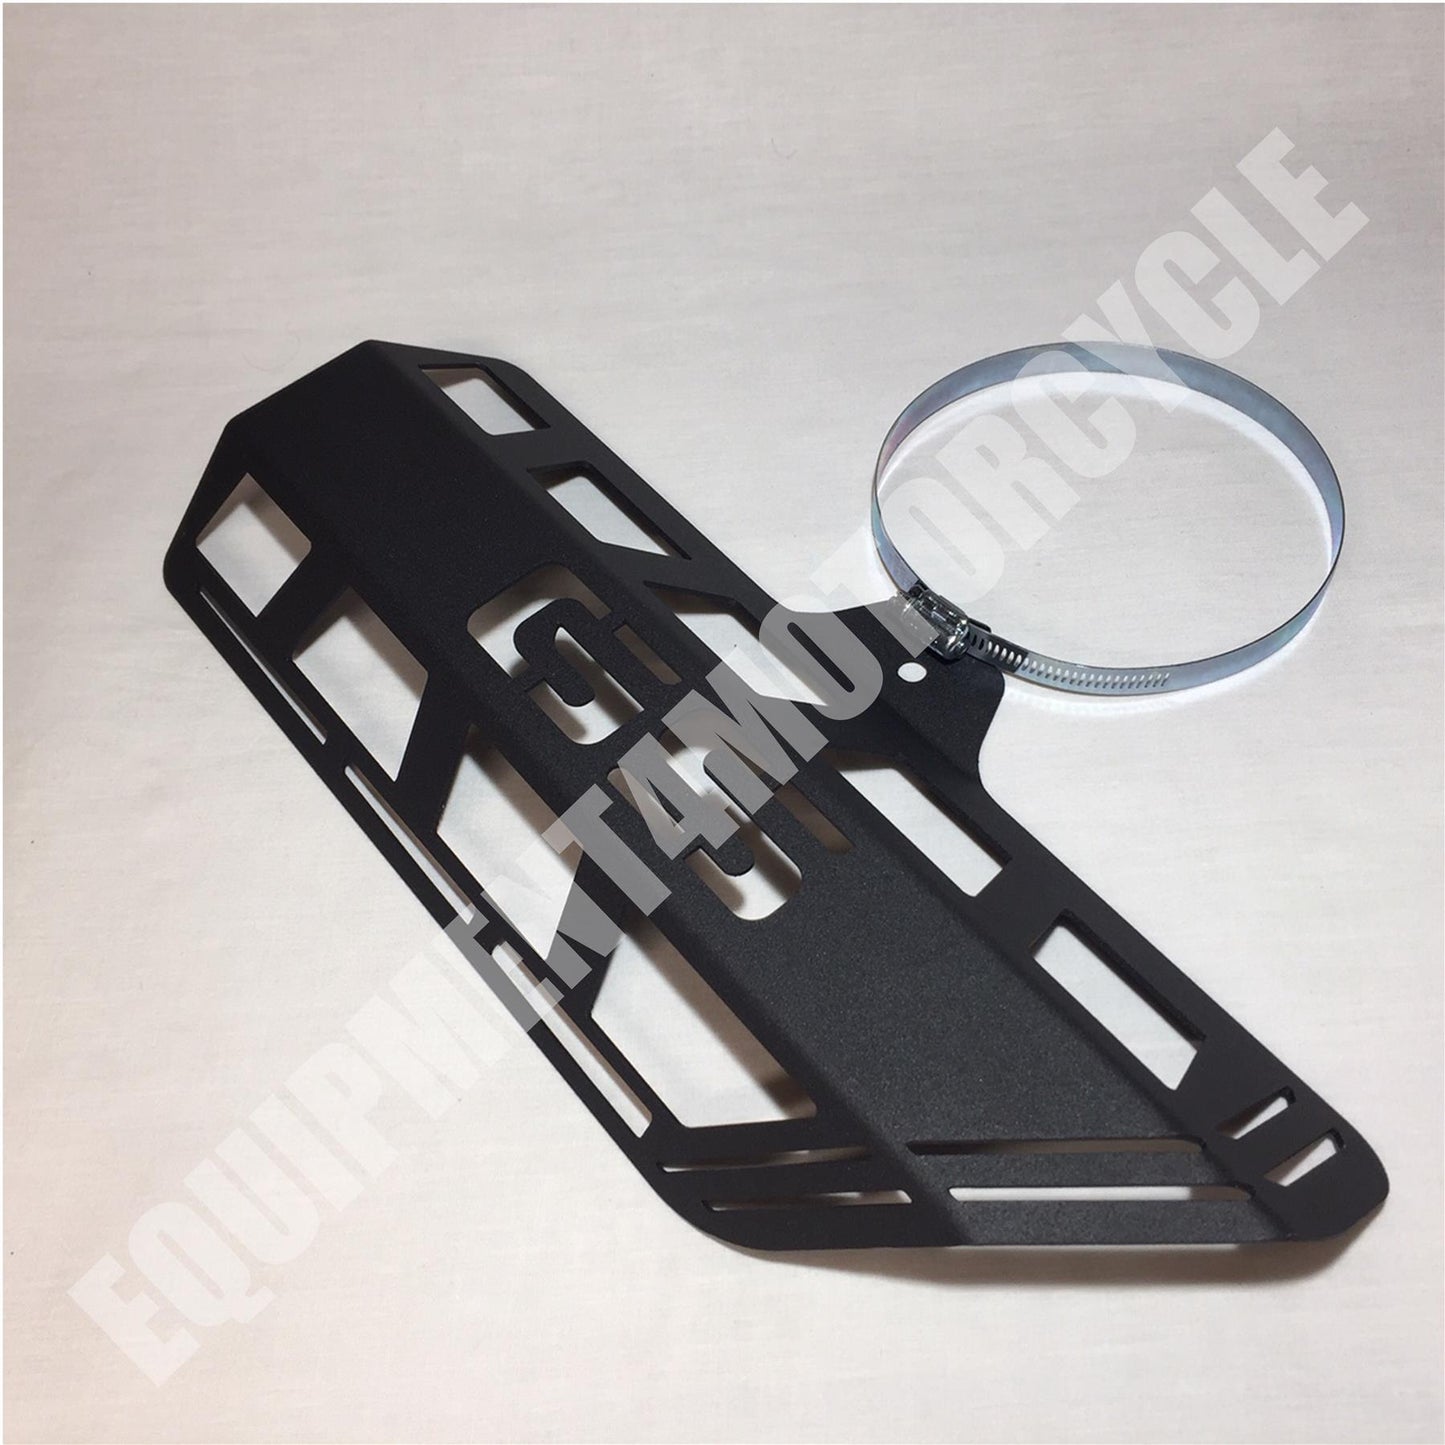 BMW F650GS exhaust guard protection 08-12